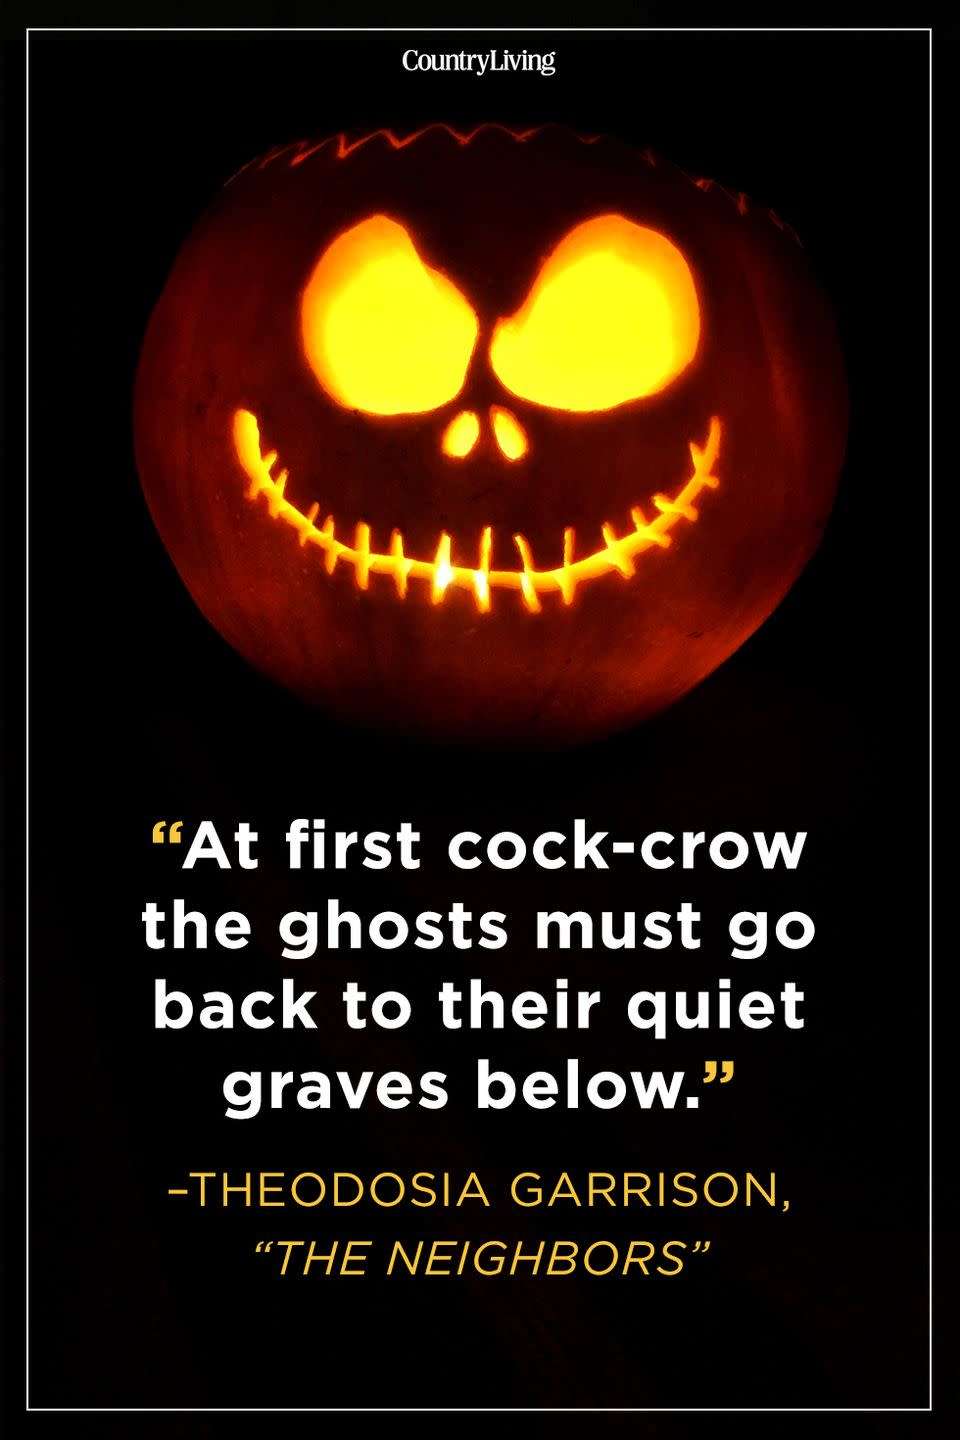 <p>"At first cock-crow the ghosts must go back to their quiet graves below.”</p>